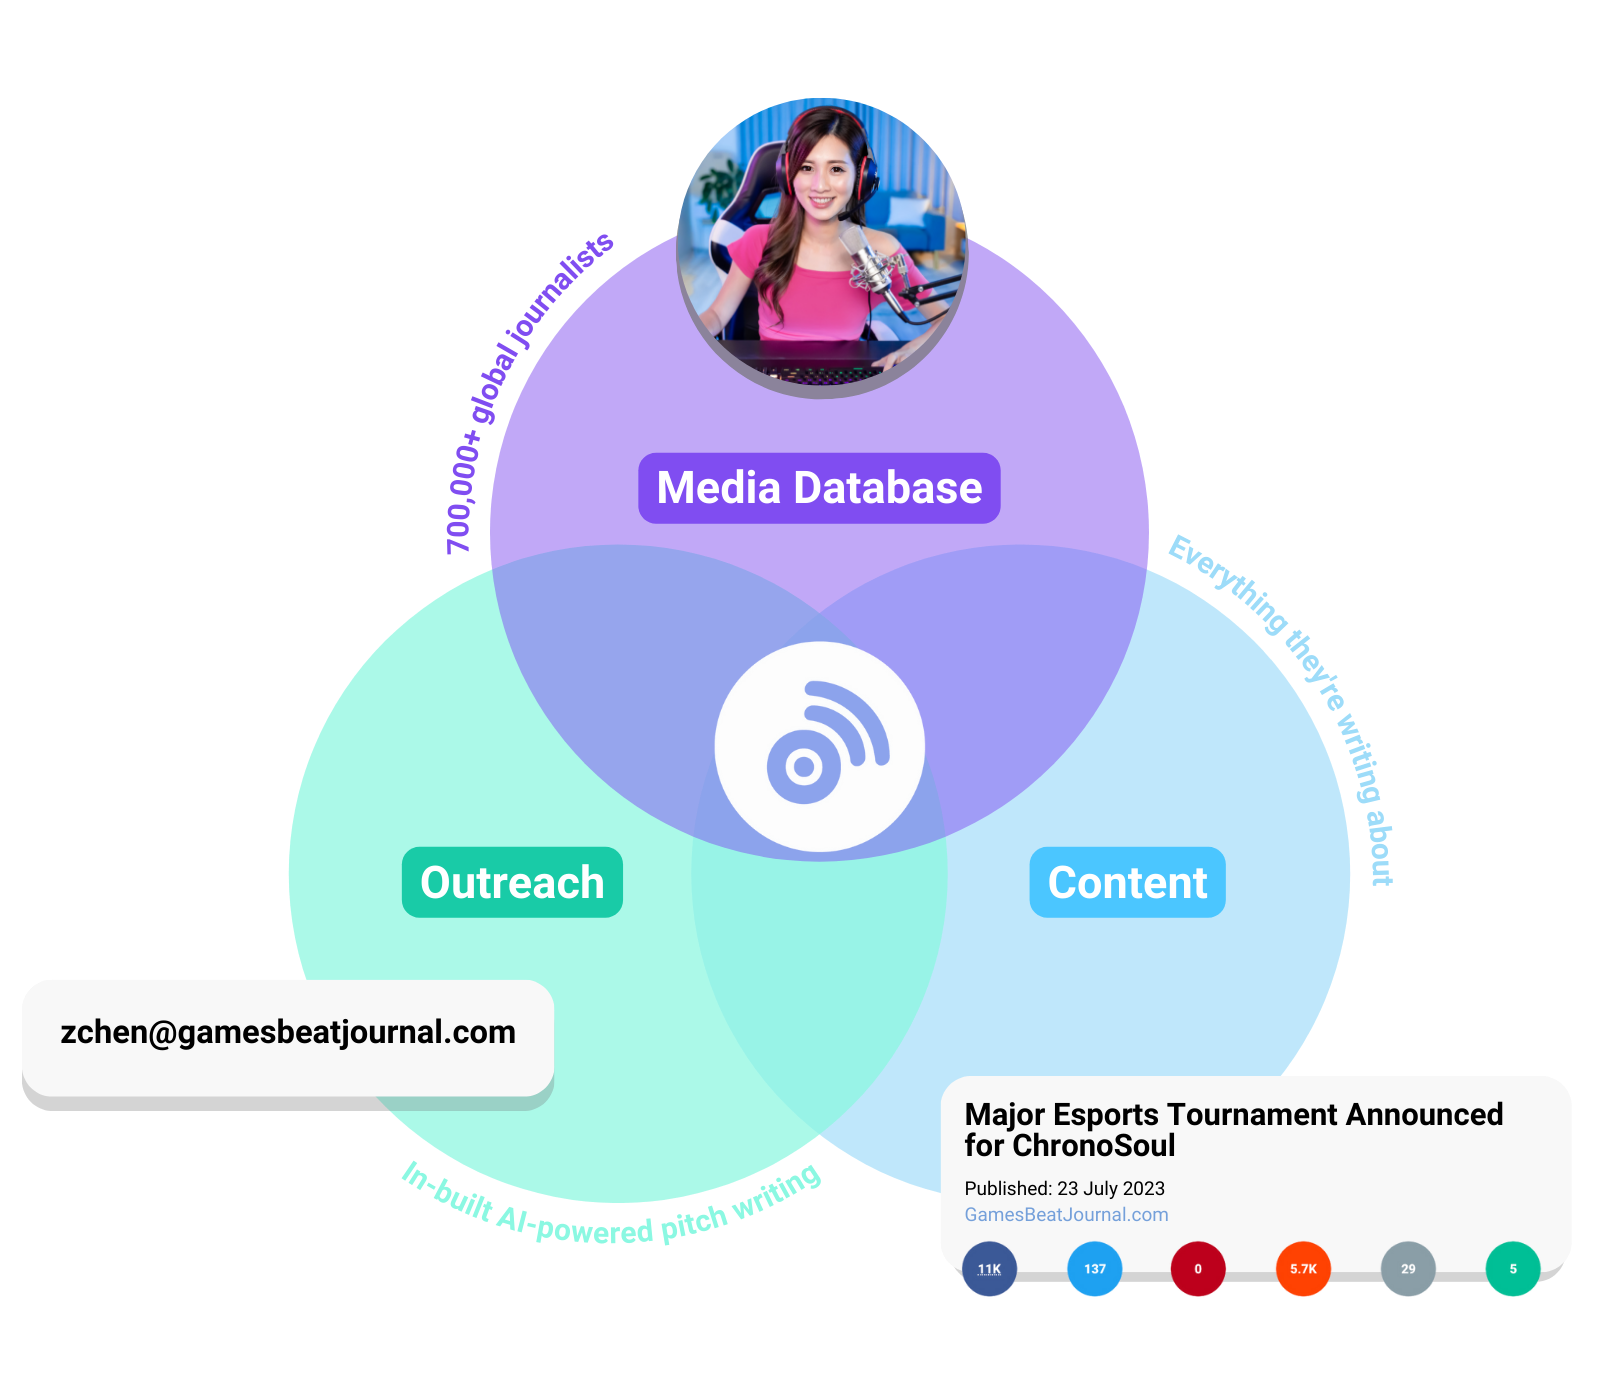 A Venn diagram showing how BuzzSumo combines a Media Database (with 700,000+ global journalists), Outreach (showing an example email address), and Content (everything they're writing about)